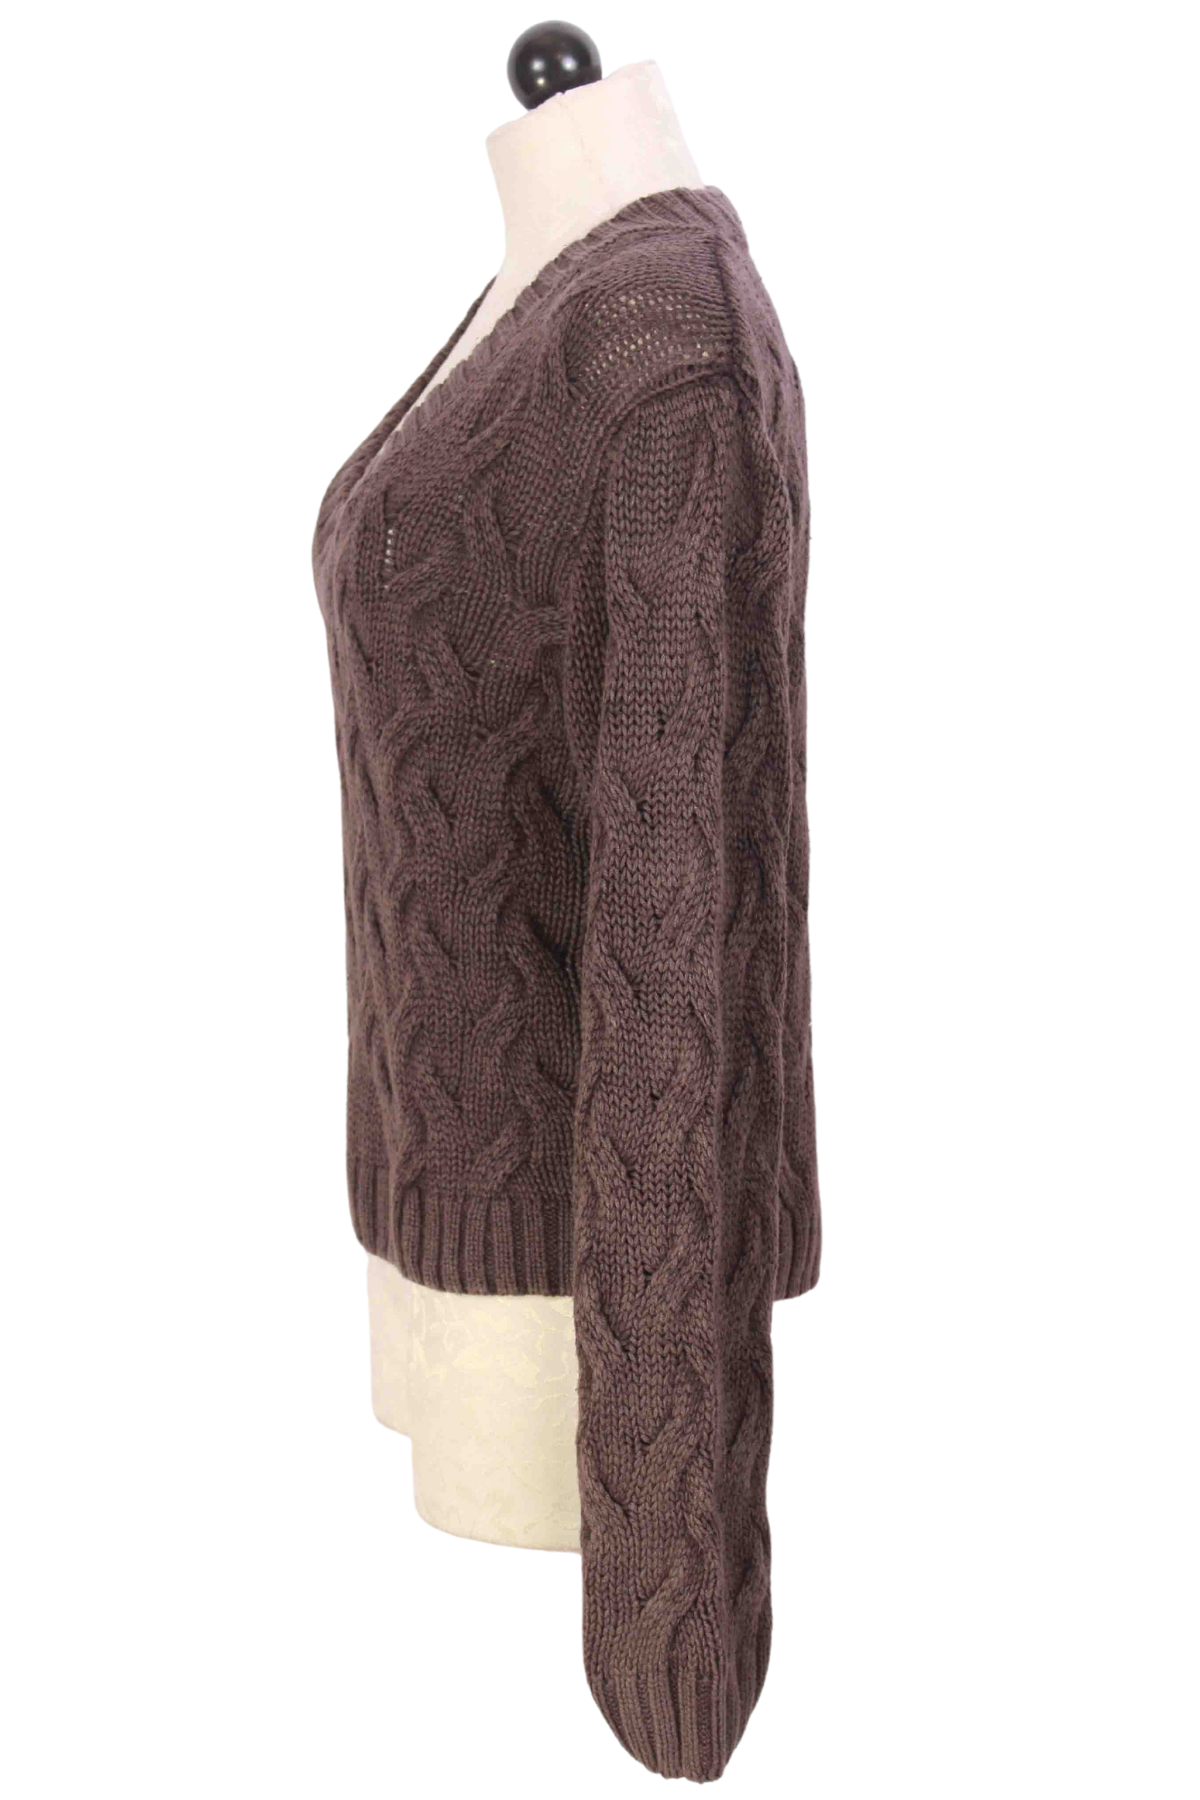 side view of Coffee Mineral Wash V Neck Cable Sweater by Bella Dahl